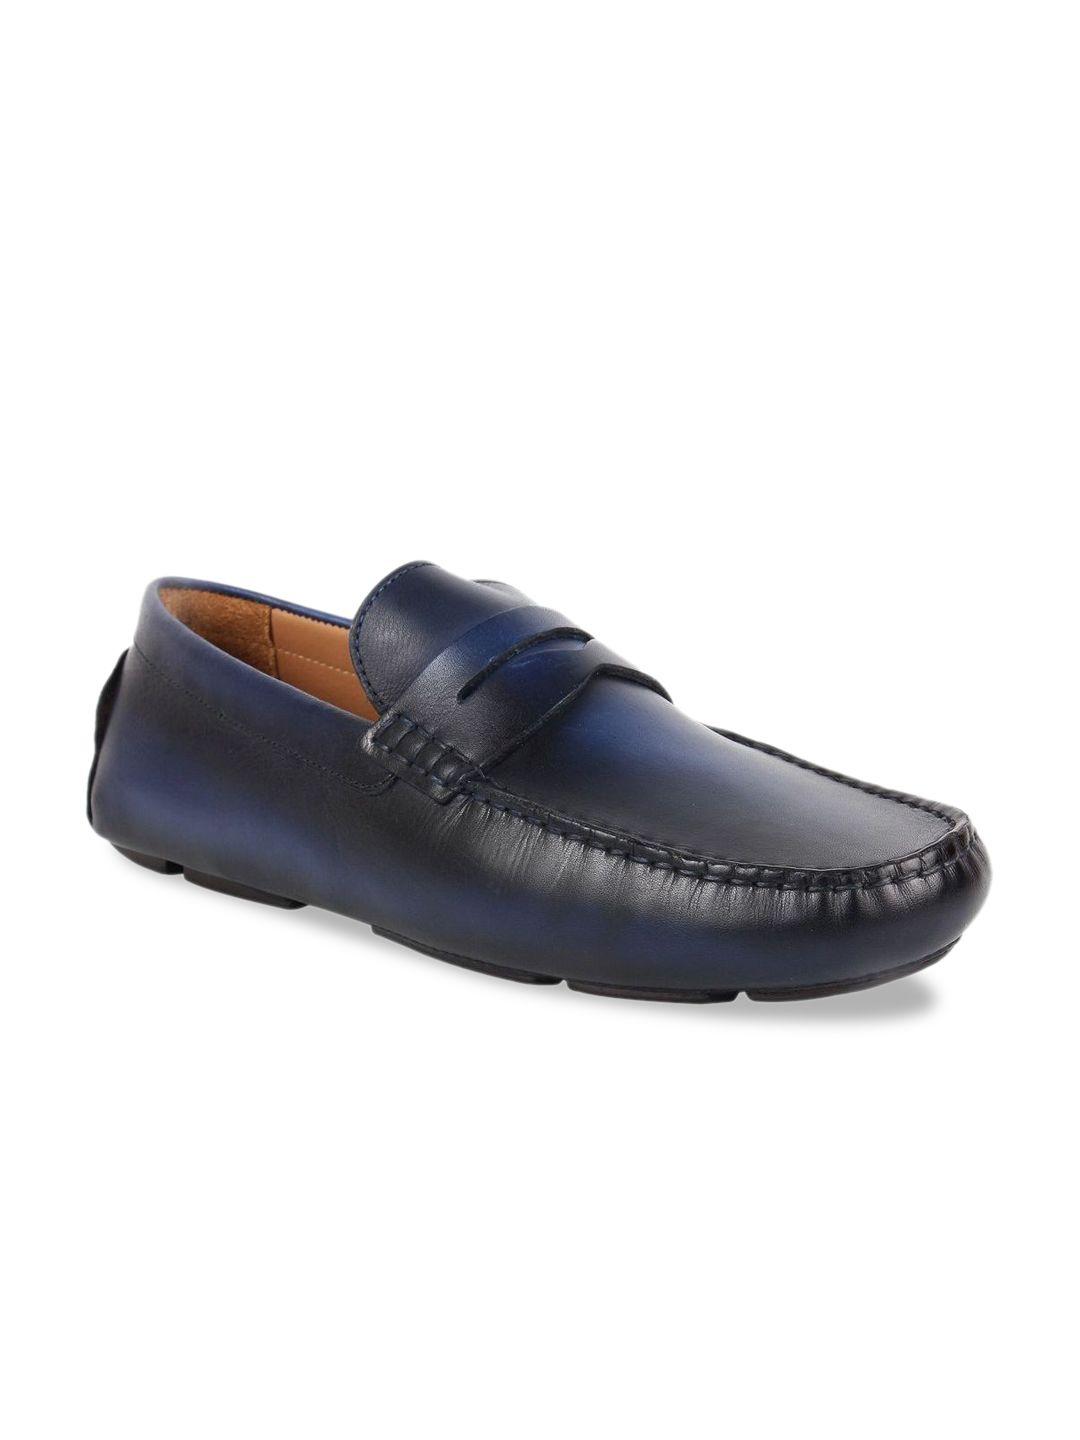 kenneth-cole-men-navy-blue-leather-driving-shoes